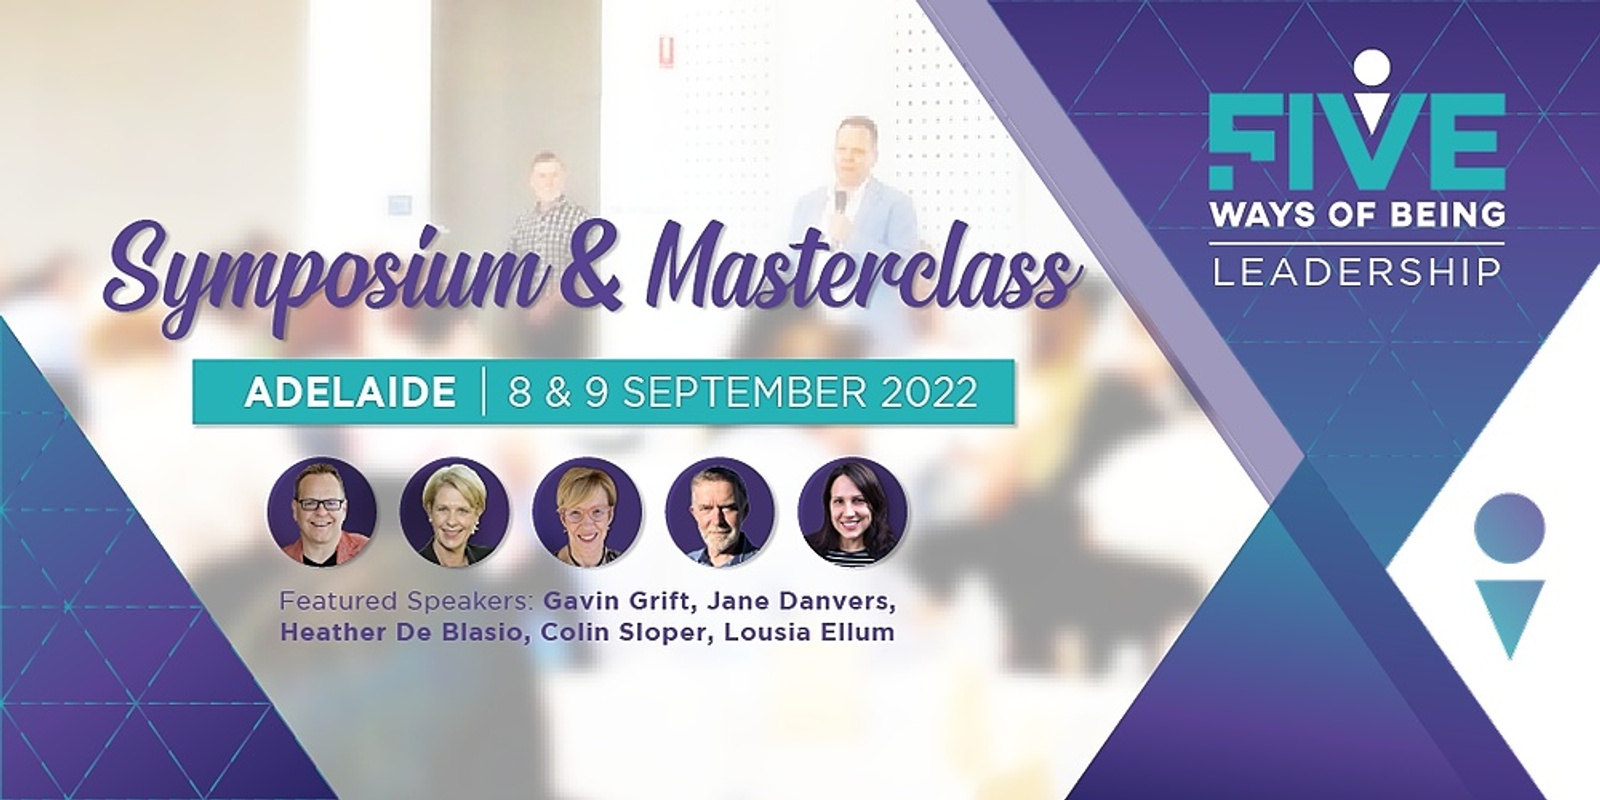 Five Ways of Being Leadership Symposium and Masterclass Adelaide